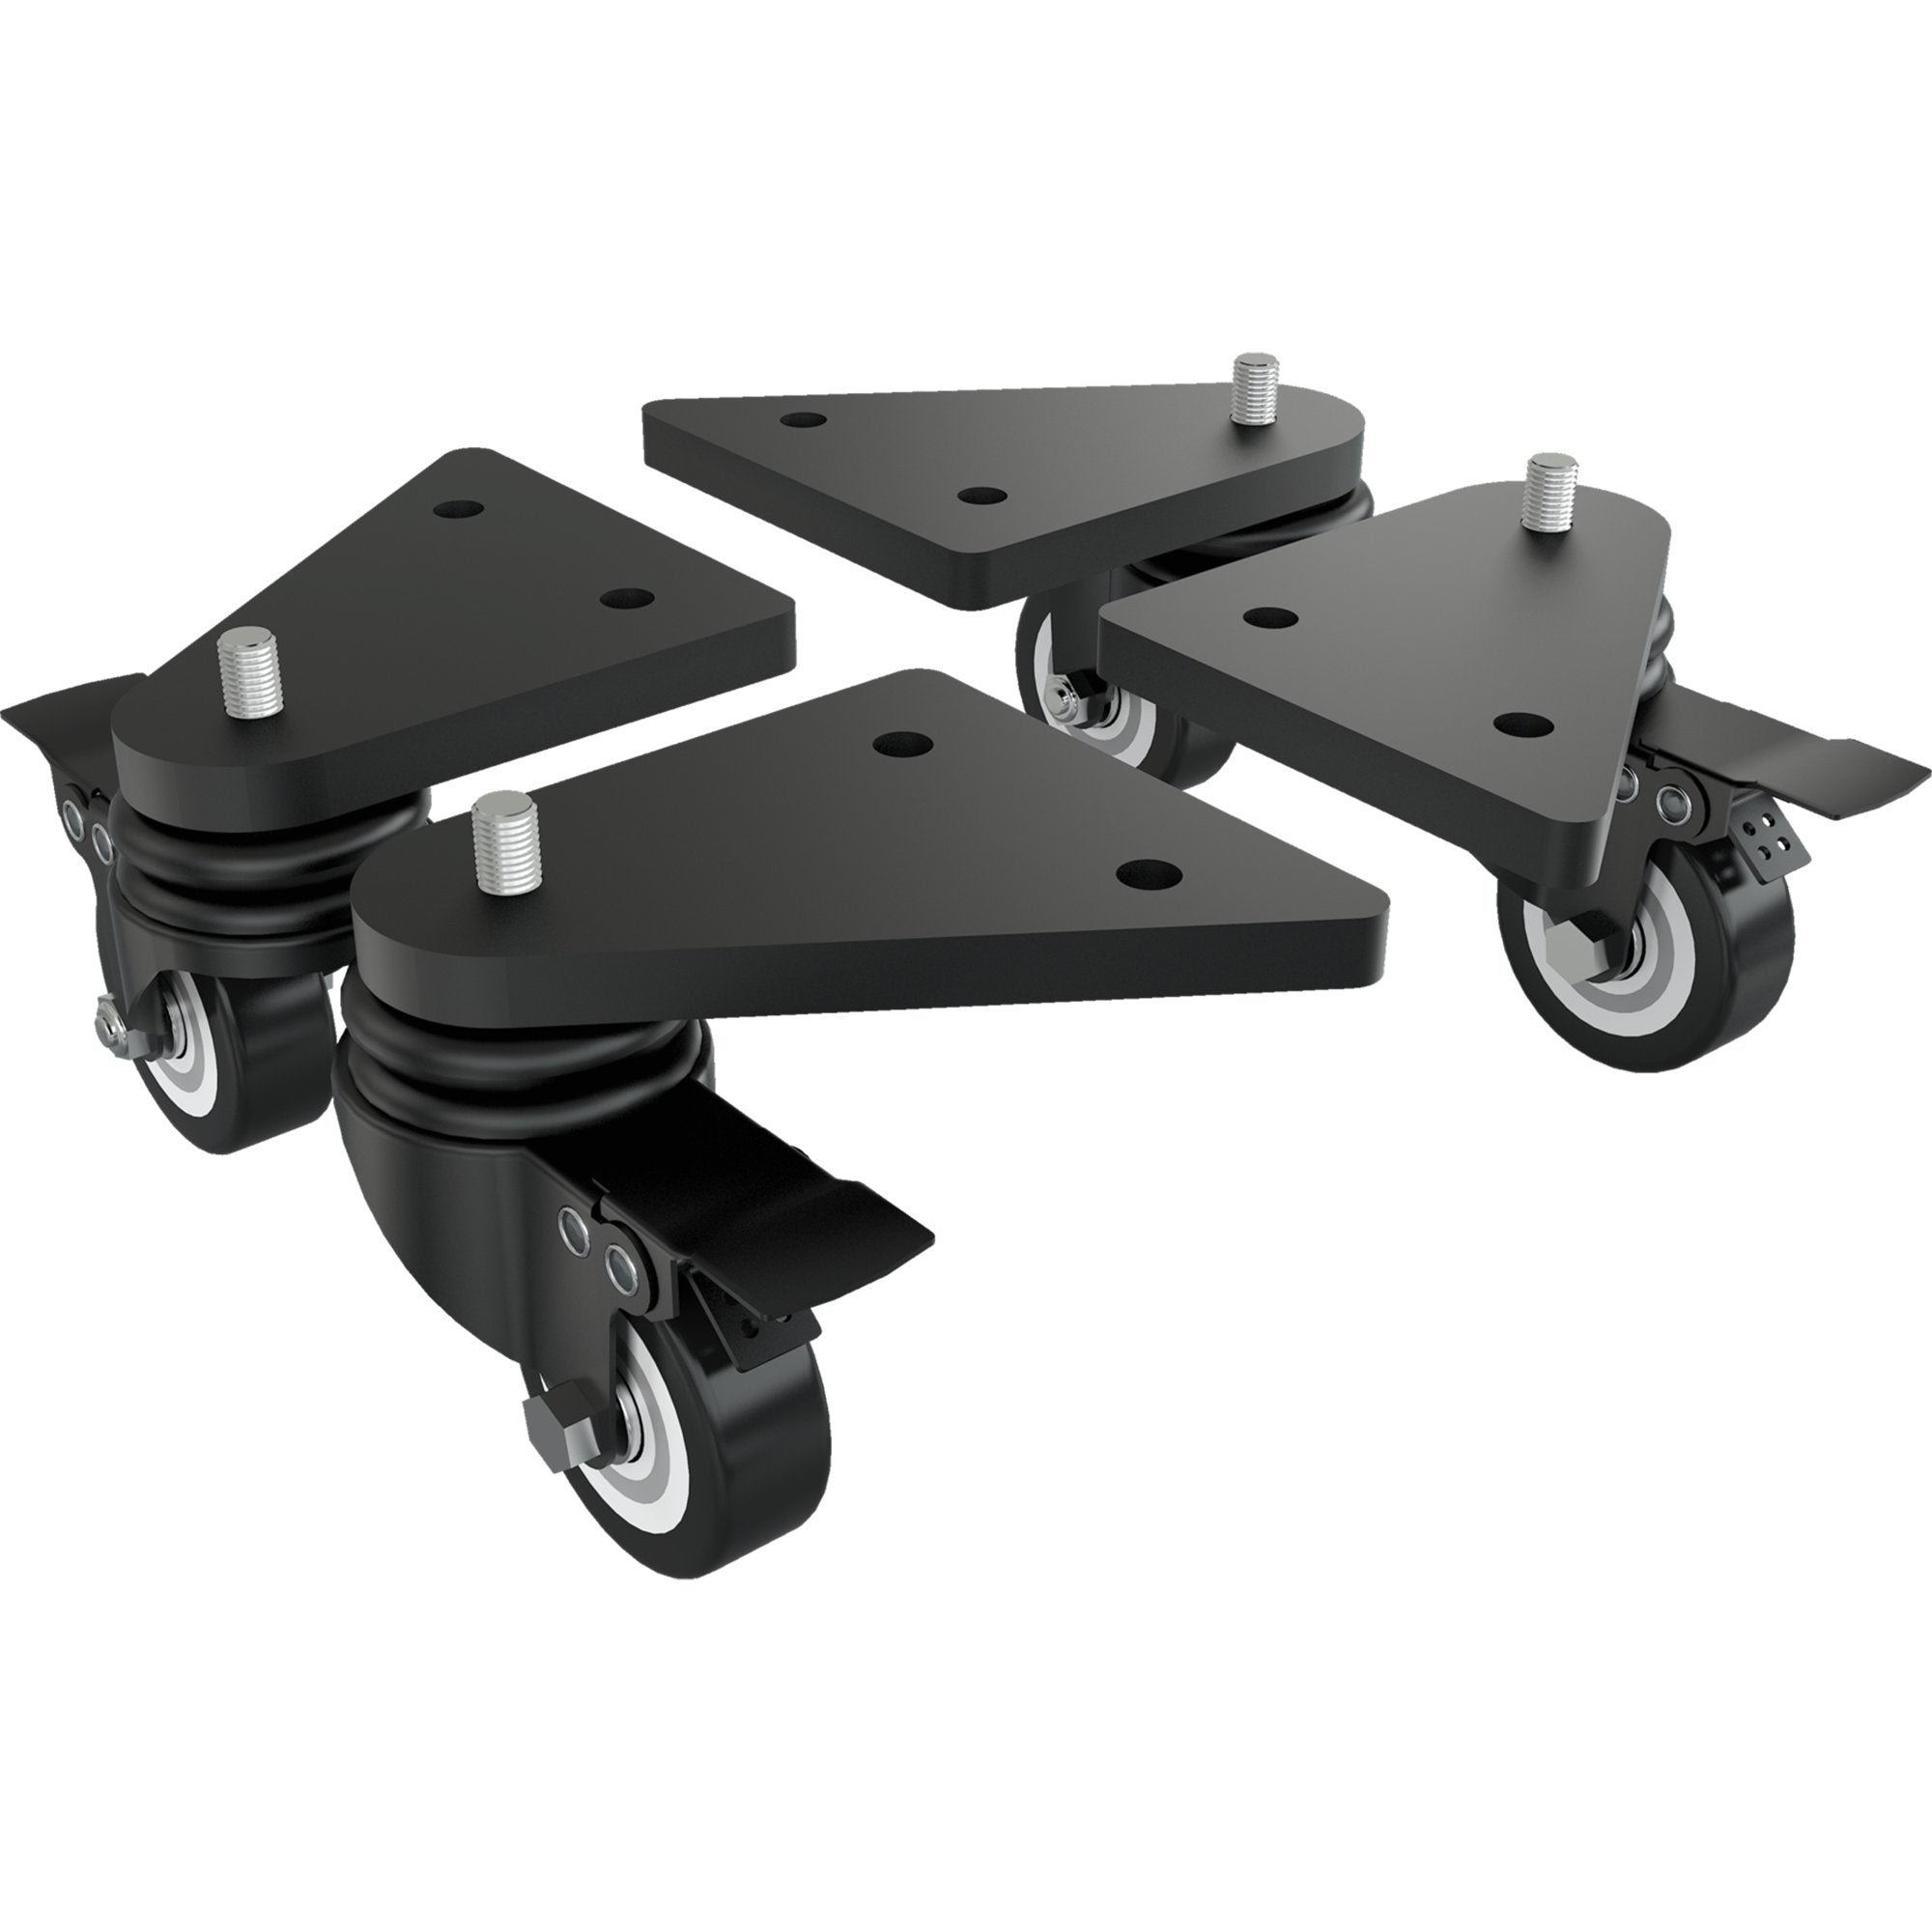 Trak Racer Castors with brakes and mounting brackets - Accessories for cockpits